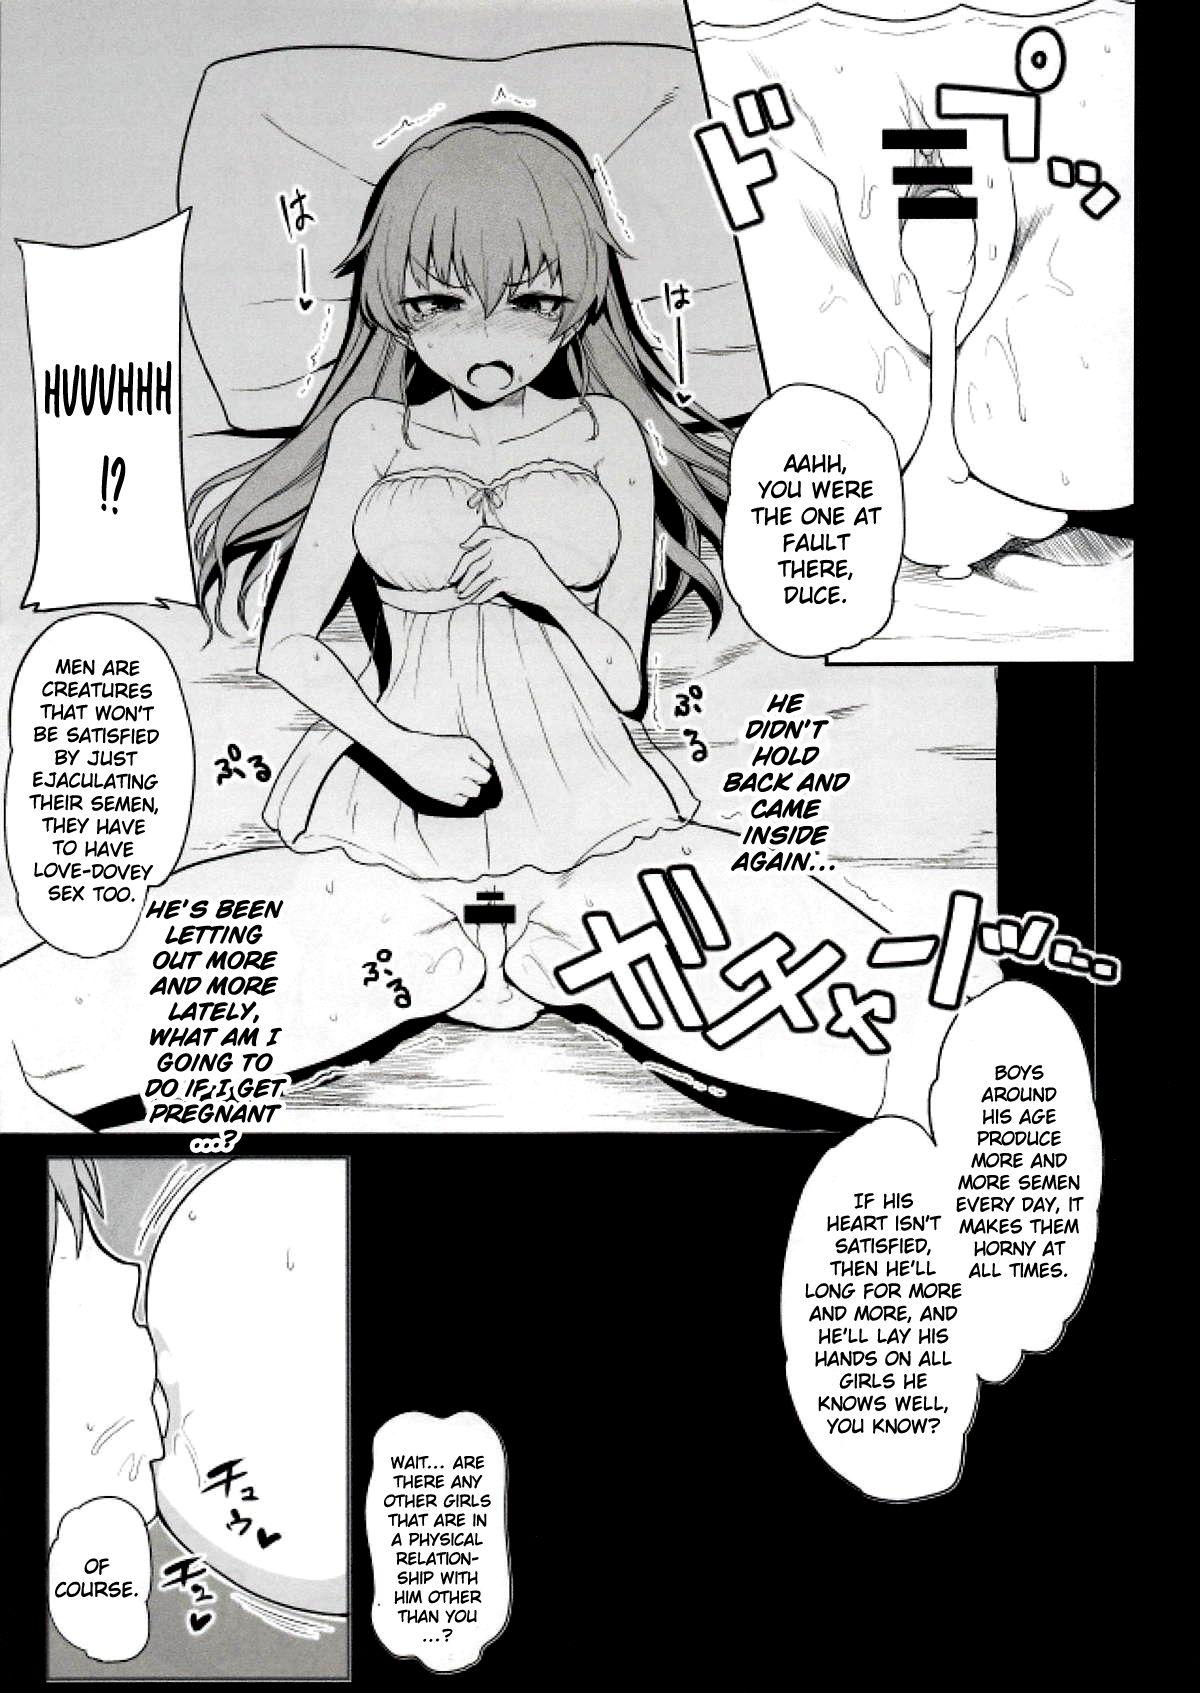 Best Blowjob Raise wa Duce no Otouto ni Naritai | I Want To Become Duce's Little Brother In The Future! - Girls und panzer Urine - Page 5